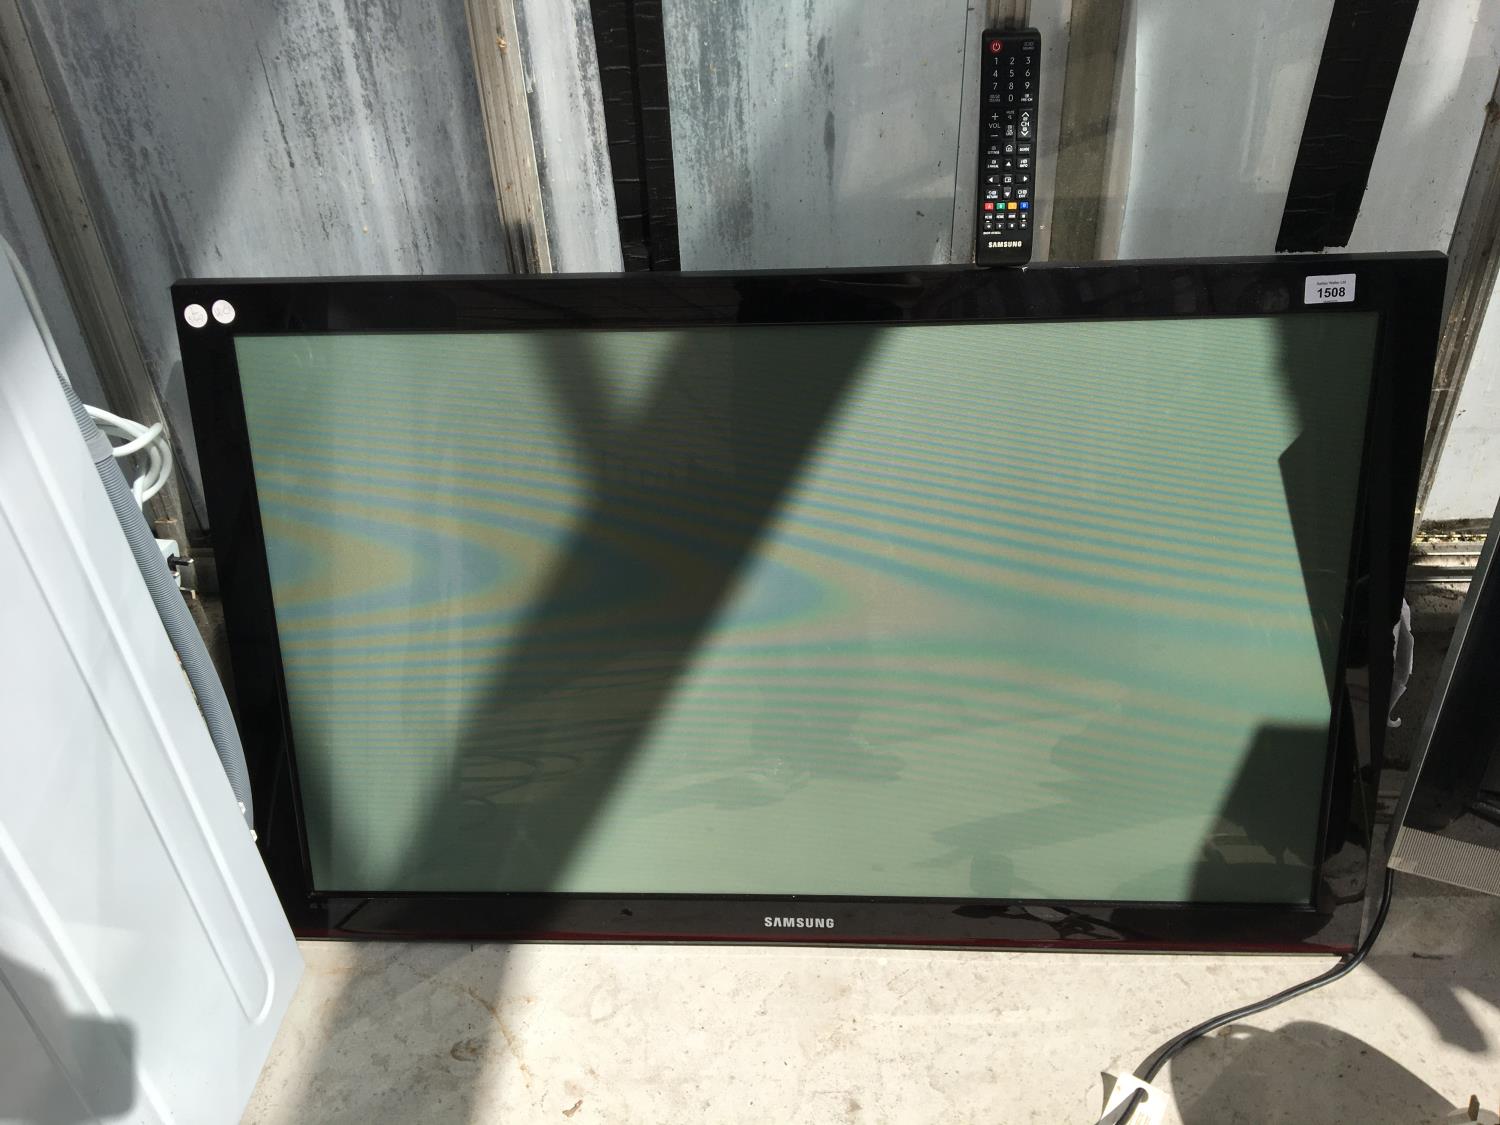 A 42 INCH SAMSUNG T.V. WITH REMOTE IN WORKING ORDER